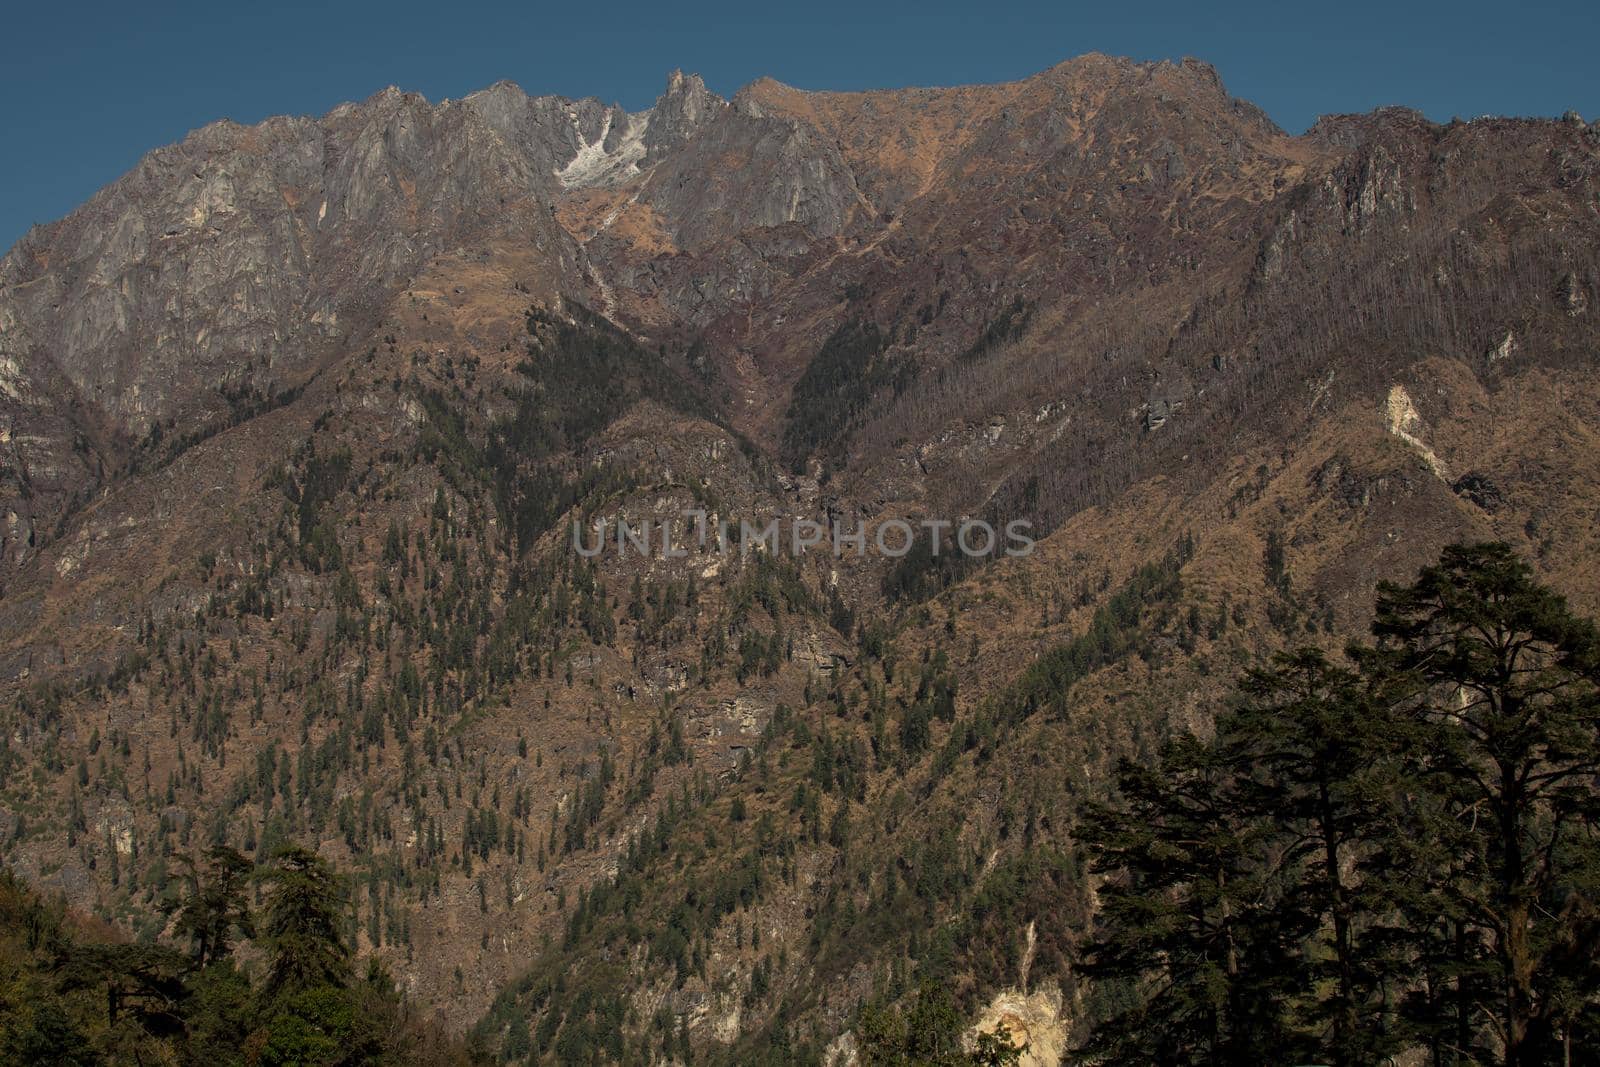 Nepalese mountain ranges along Annapurna circuit by arvidnorberg